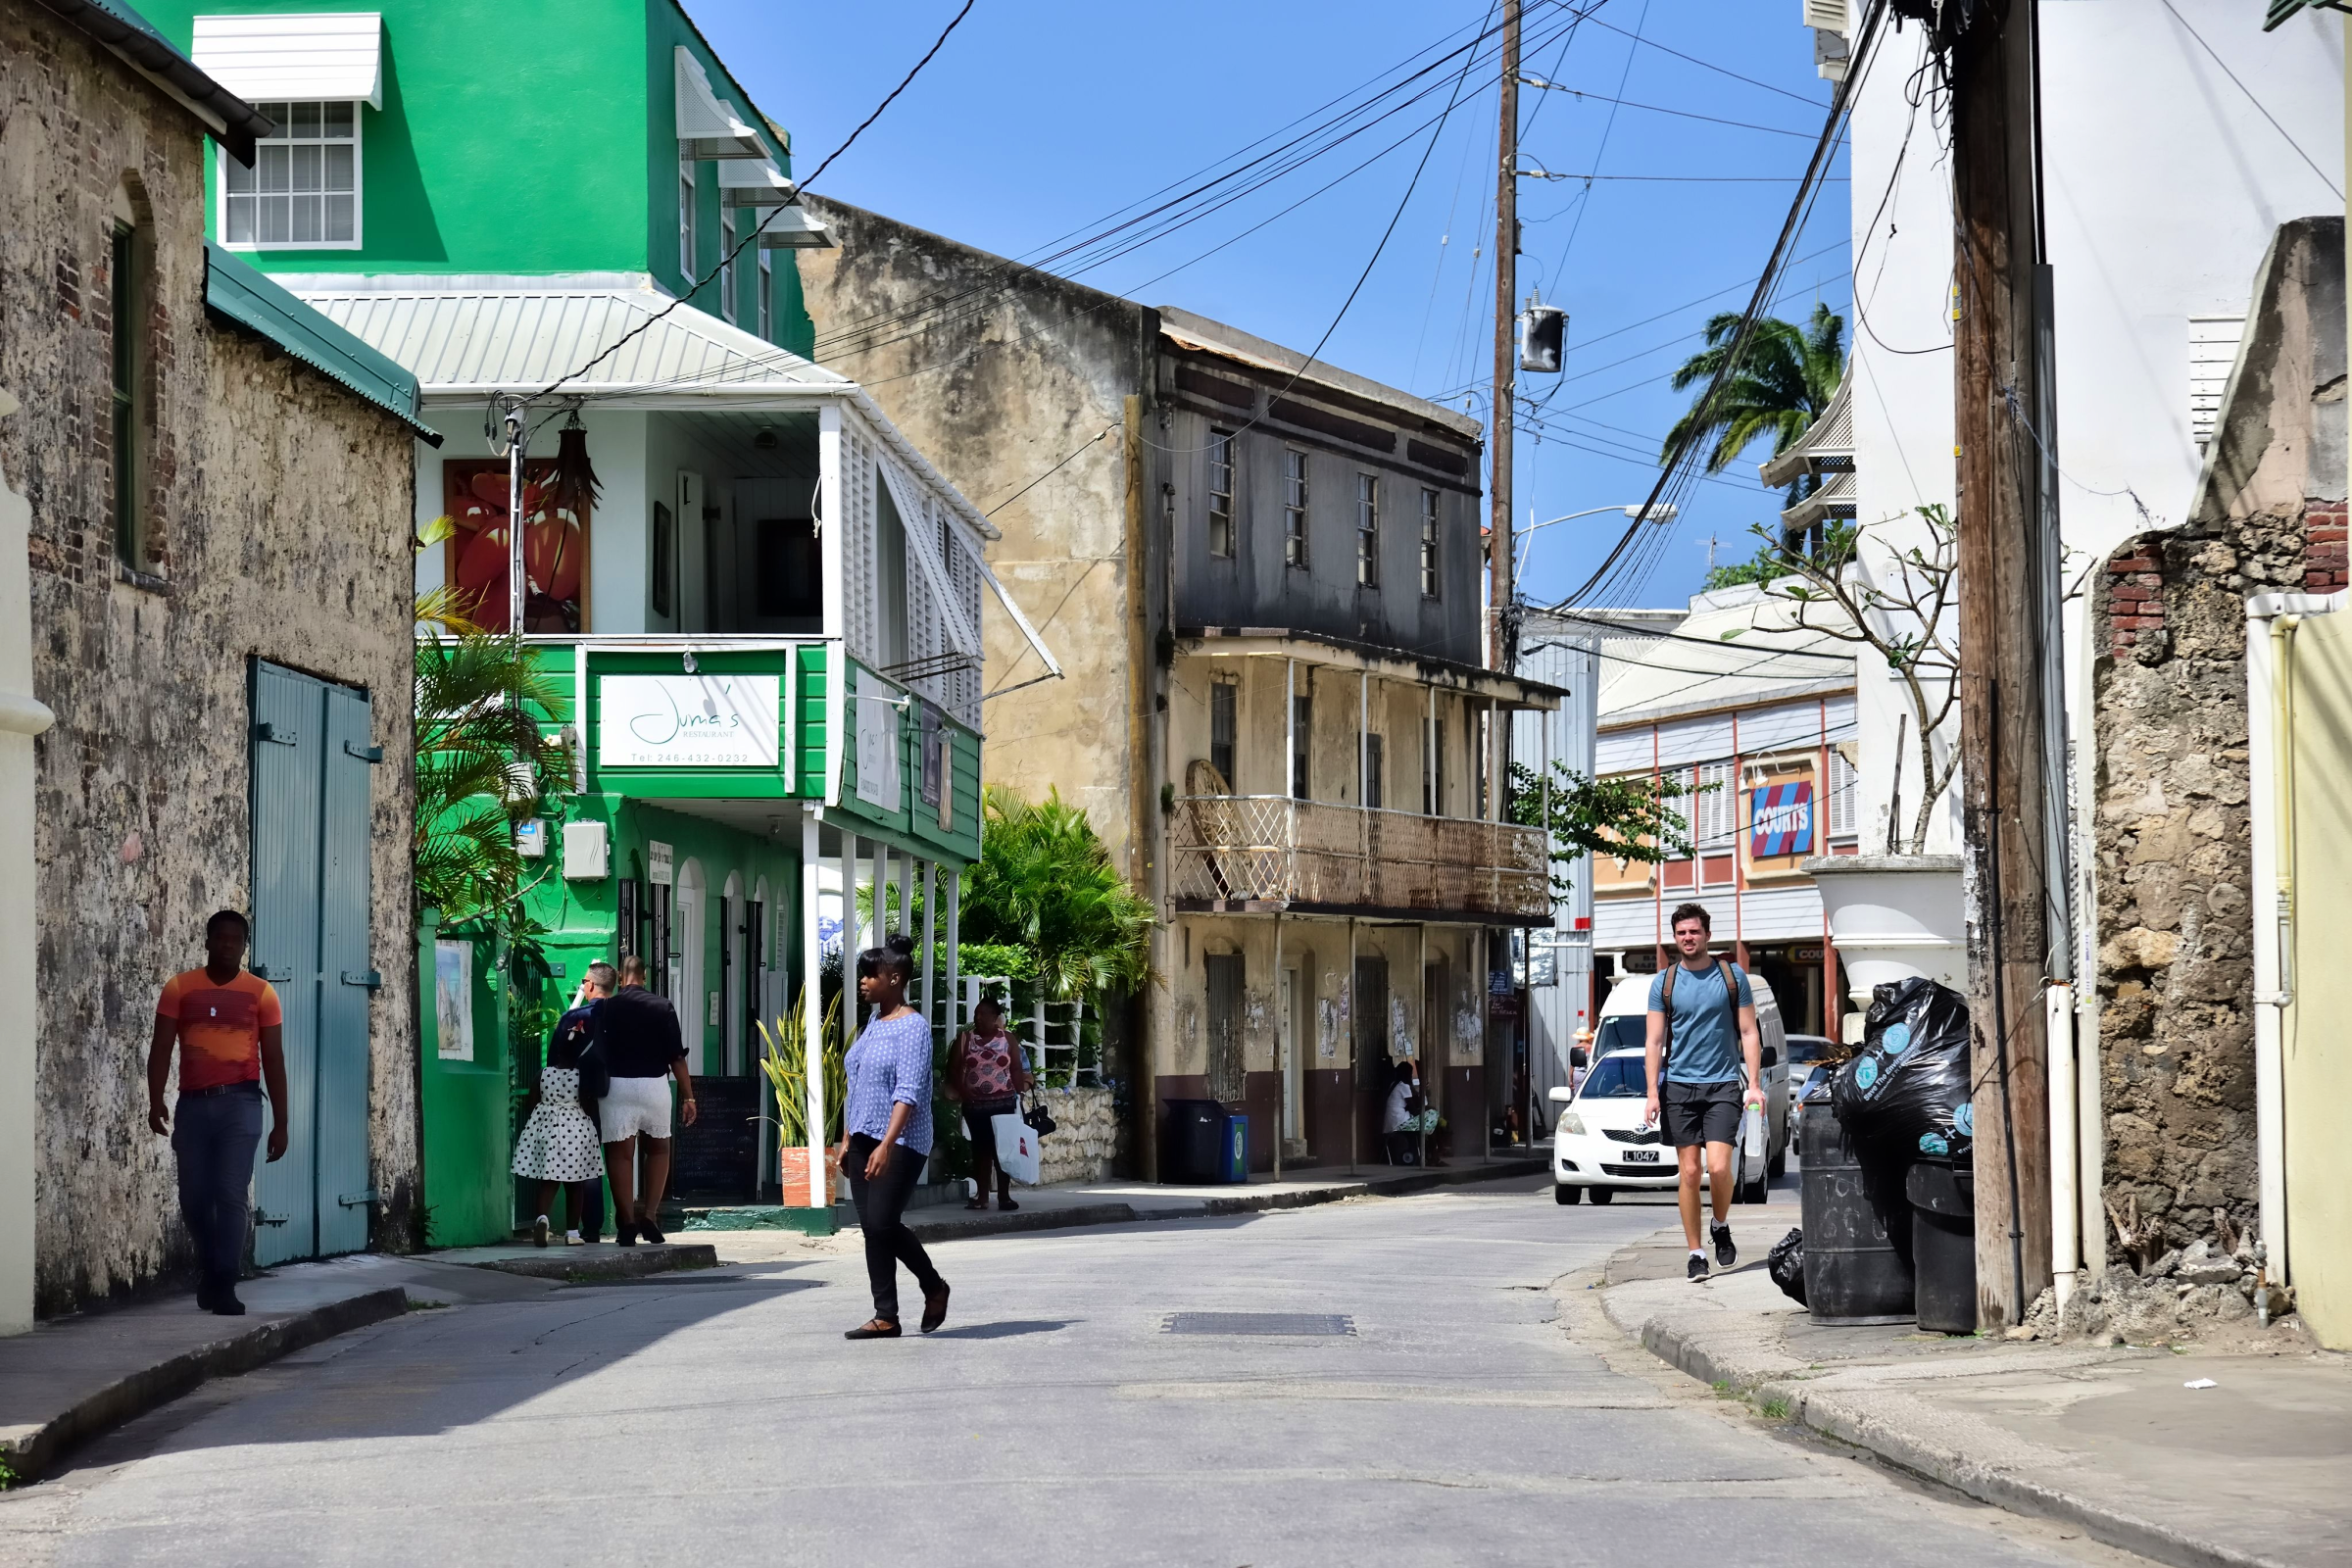 Speightstown – The Barbados Cultural Capital